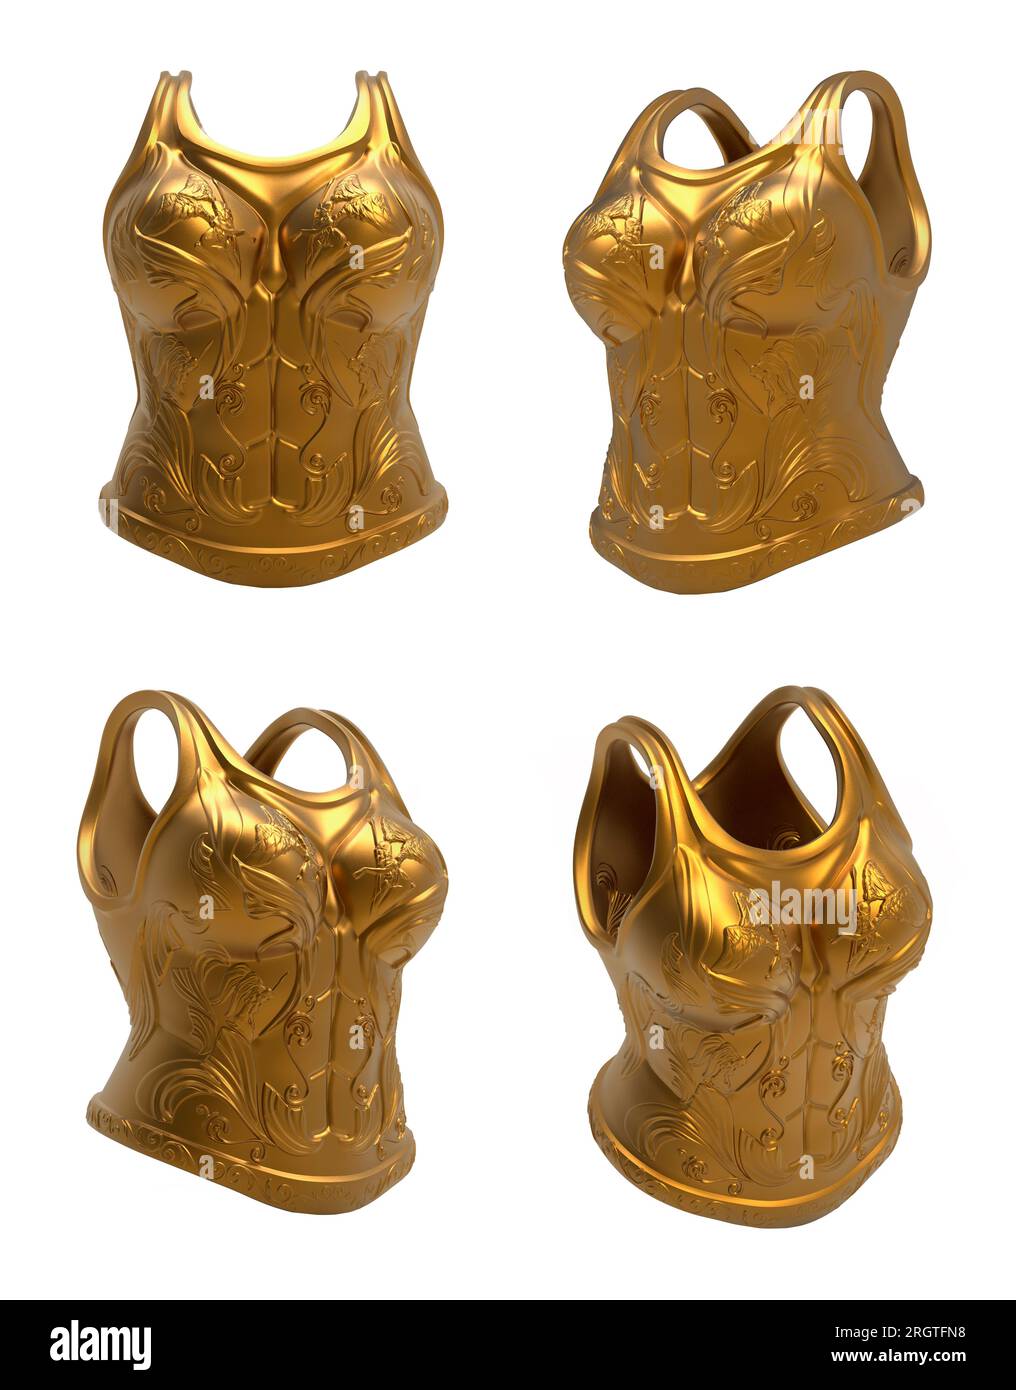 Isolated 3d render illustration of medieval golden female warrior armor with ornaments and angel engravings. Stock Photo